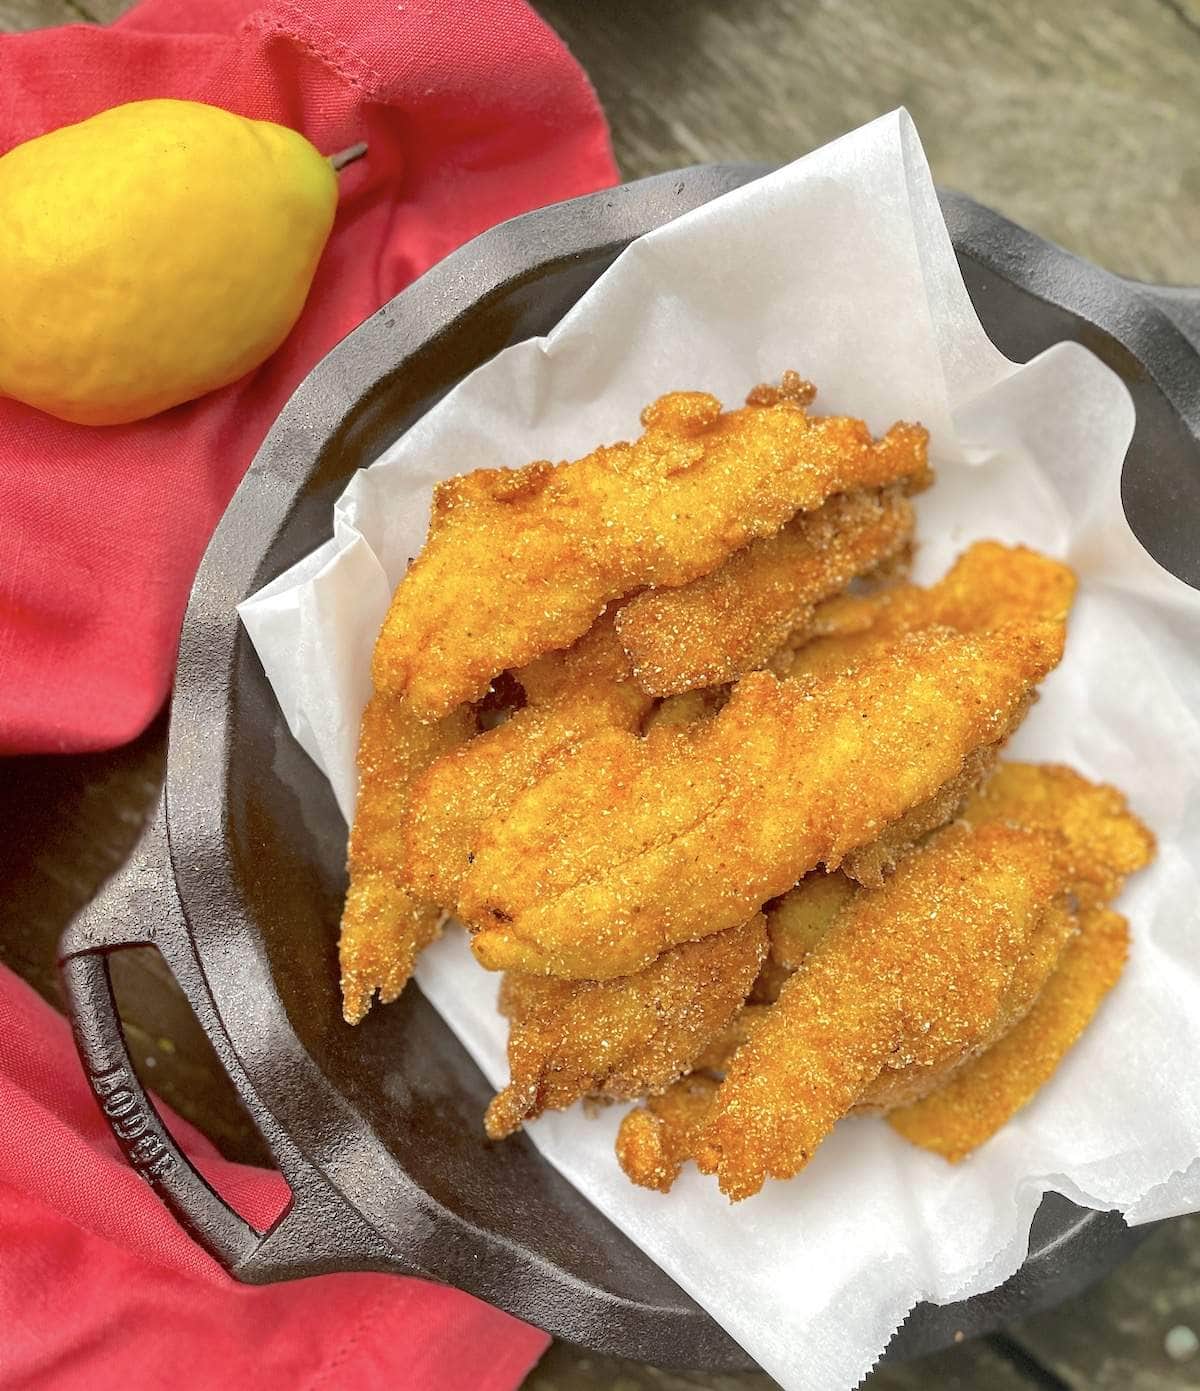 A cast iron pan filled with cornmeal crusted fried fish next to a lemon.